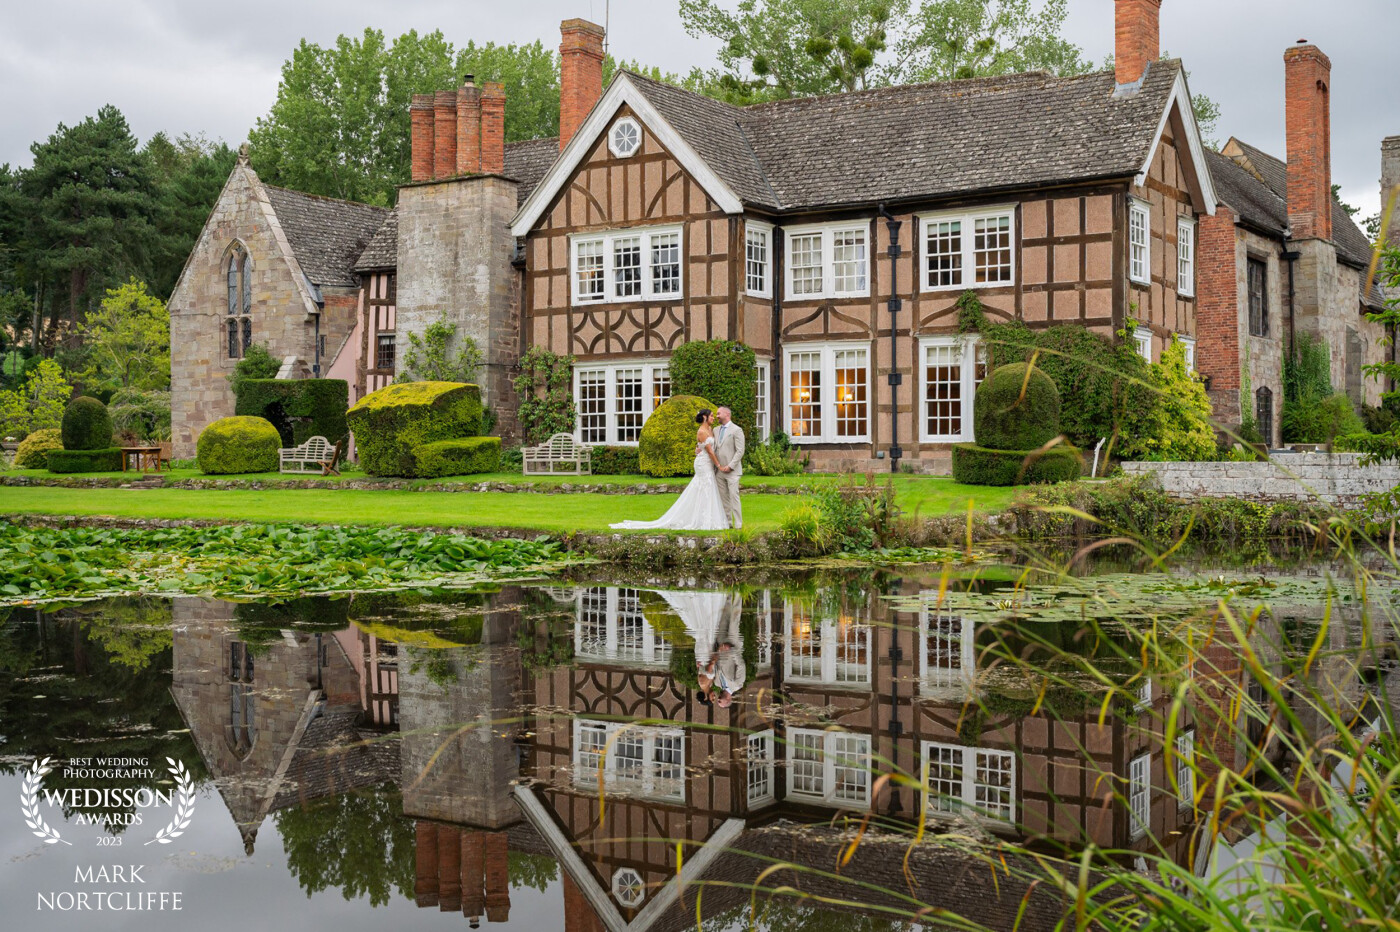 Keeley & Sean got married at the delightful Brinsop Court Hereford. My first time at this venue. It certainly delivers on the the numerous locations to shoot your couple. Perfect setting for a perfect day!